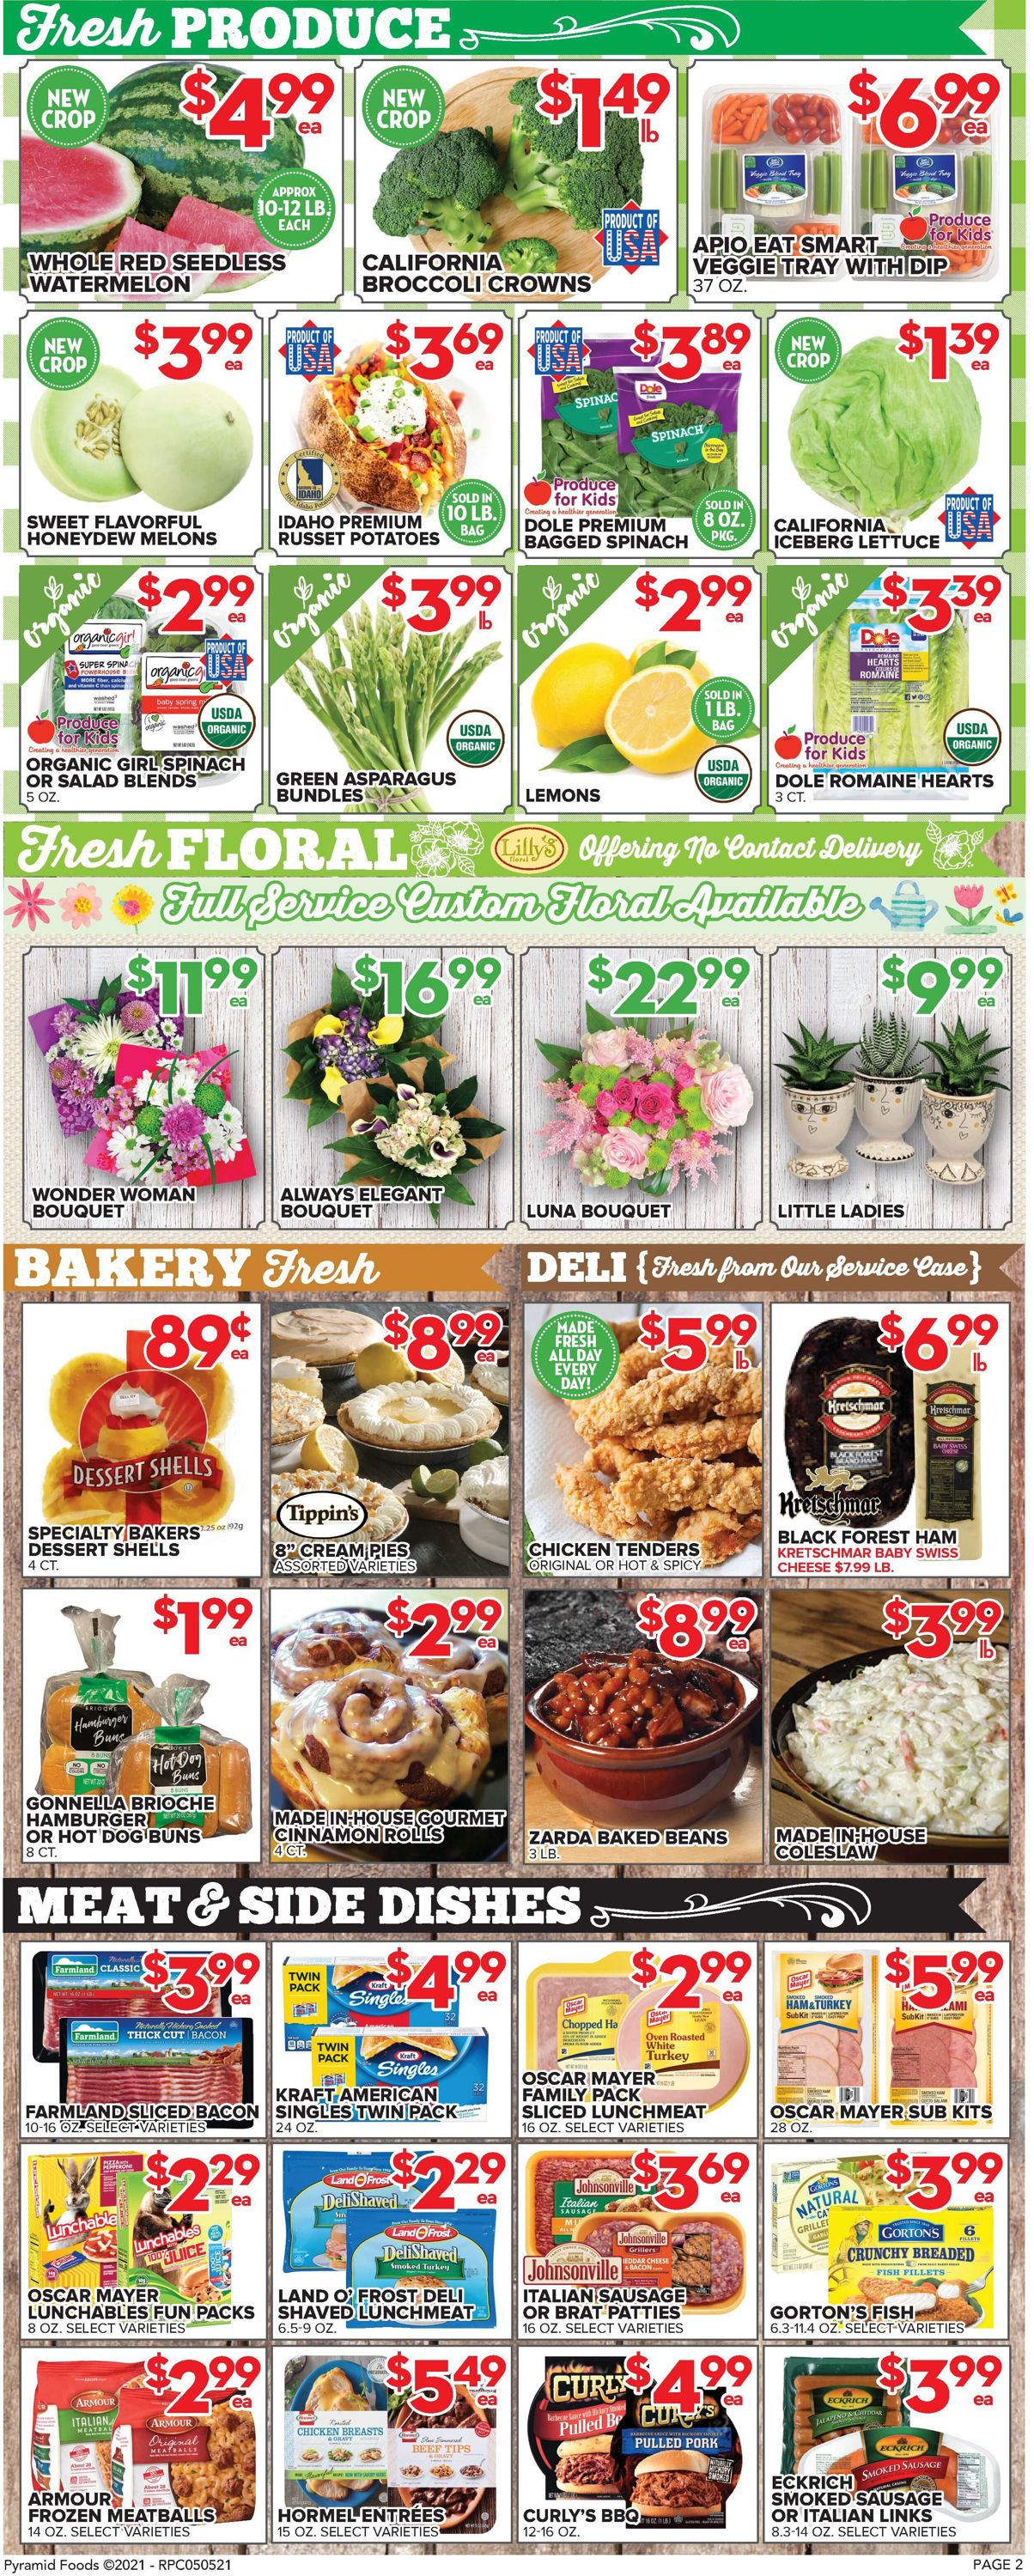 Price Cutter Weekly Ad Circular - valid 05/05-05/11/2021 (Page 2)